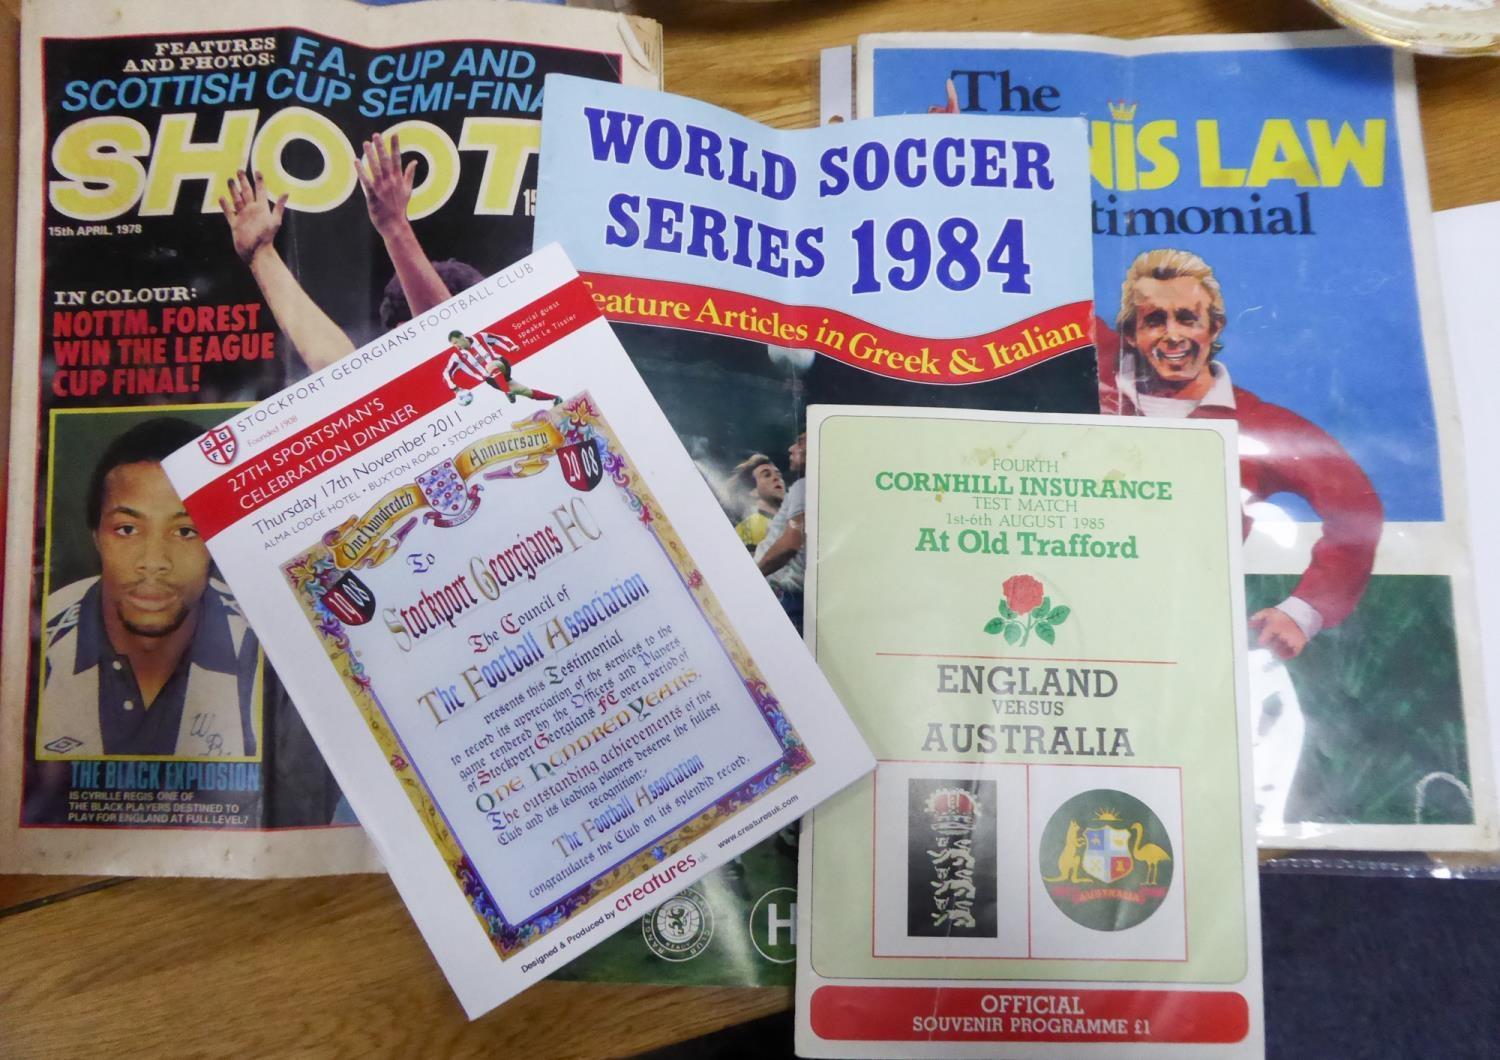 SOUVENIR SPORTING PROGRAMMES, to include: DENNIS LAW'S TESTIMONIAL, 1973, with signed envelope, To